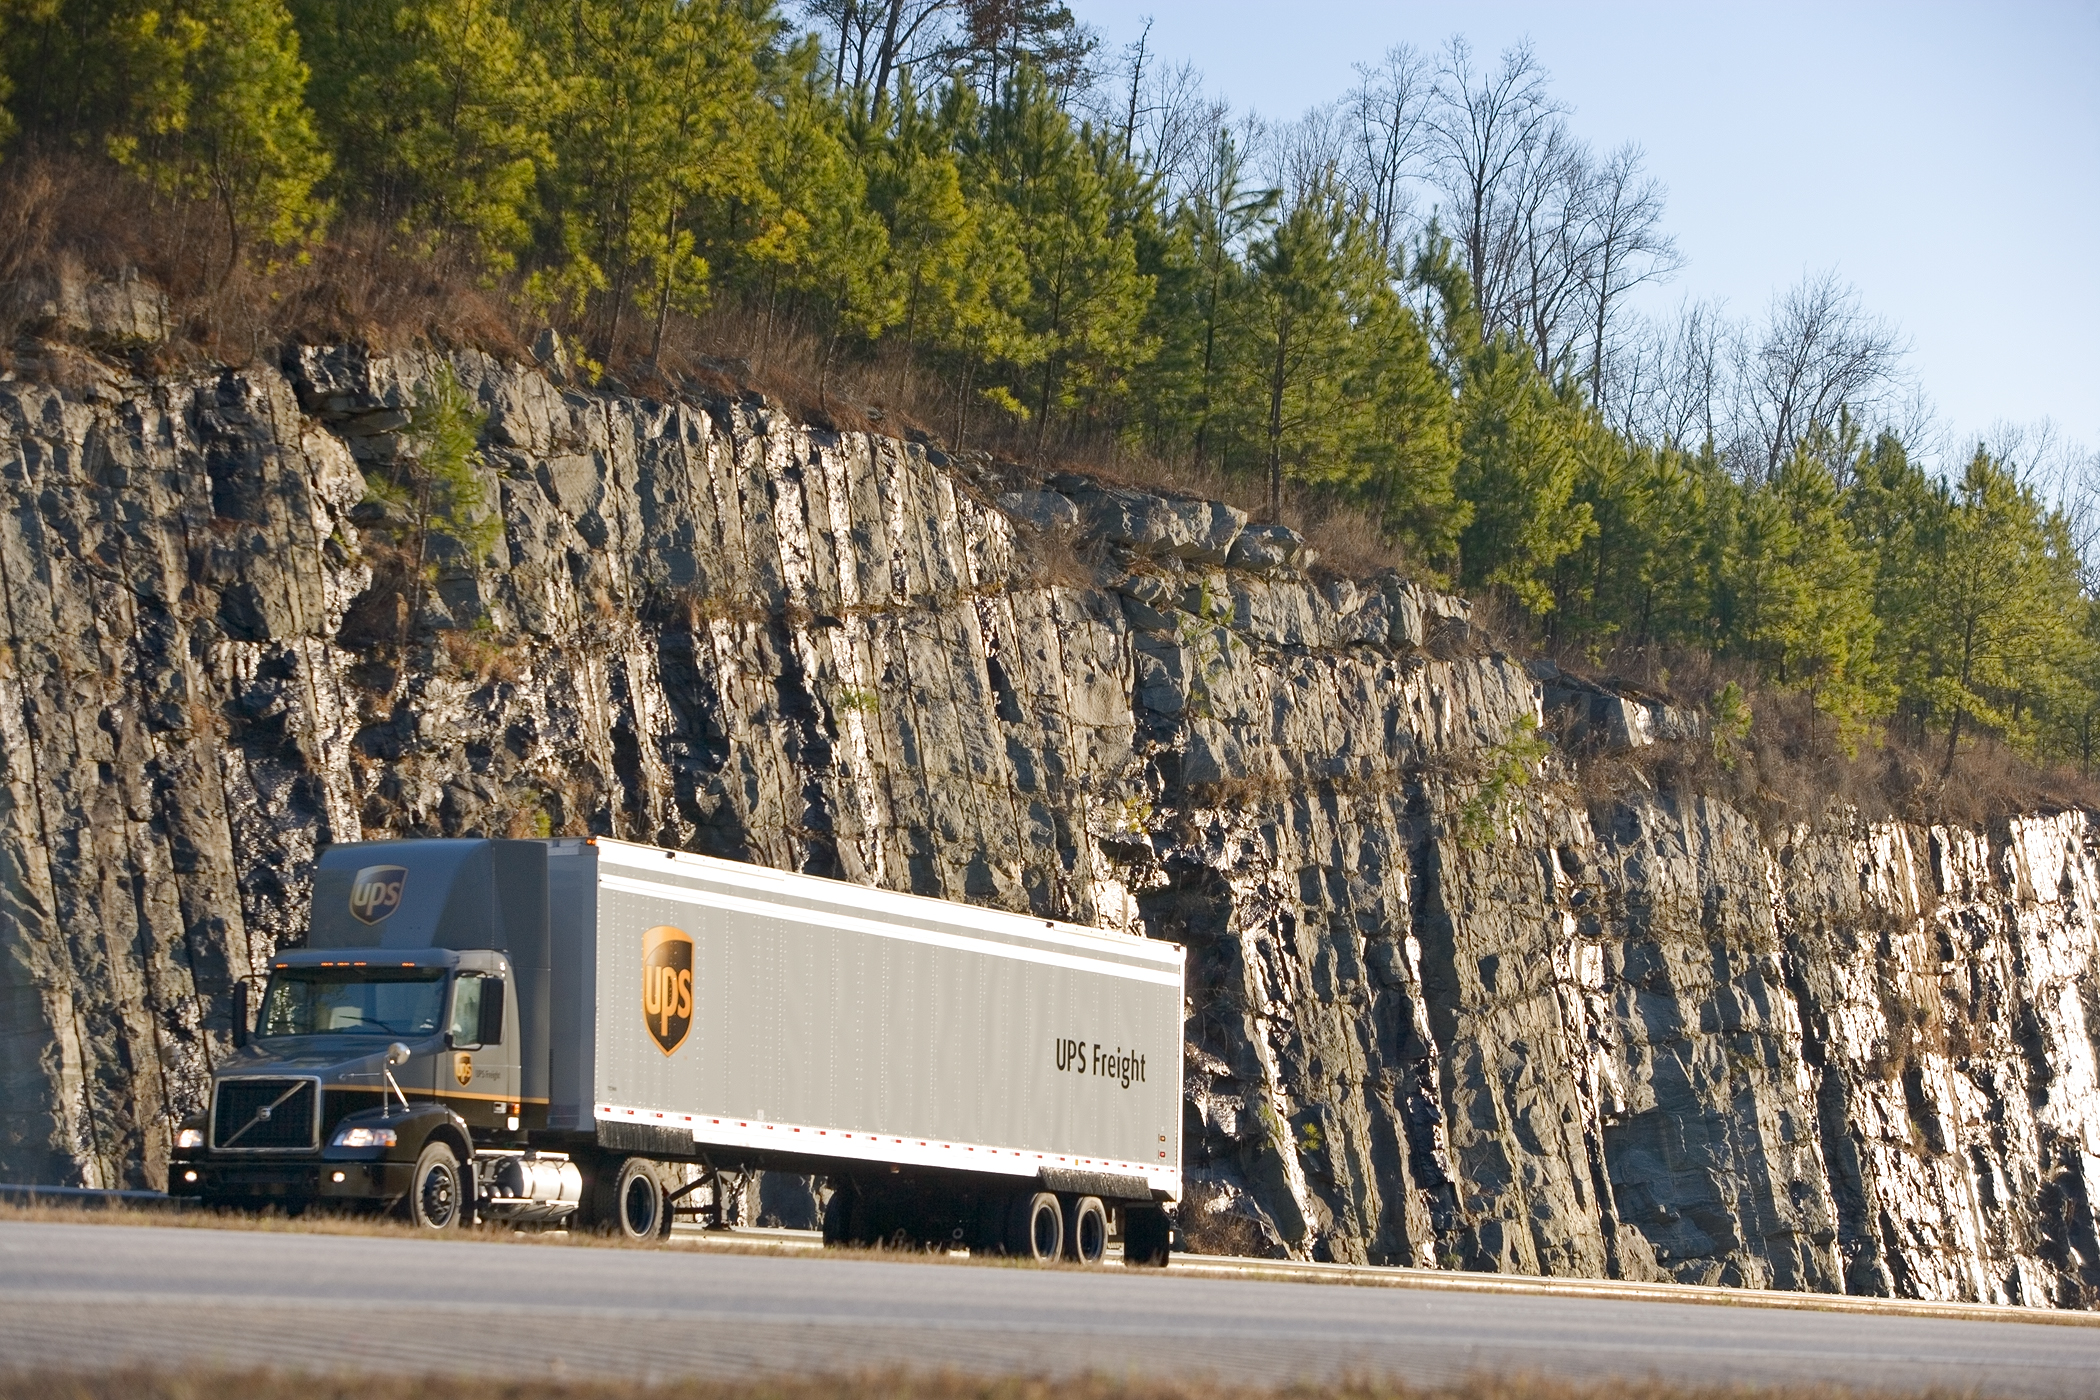 UPS, the biggest parcel shipping company in the world aims to reduce carbon footprint in an easy, flexible way.